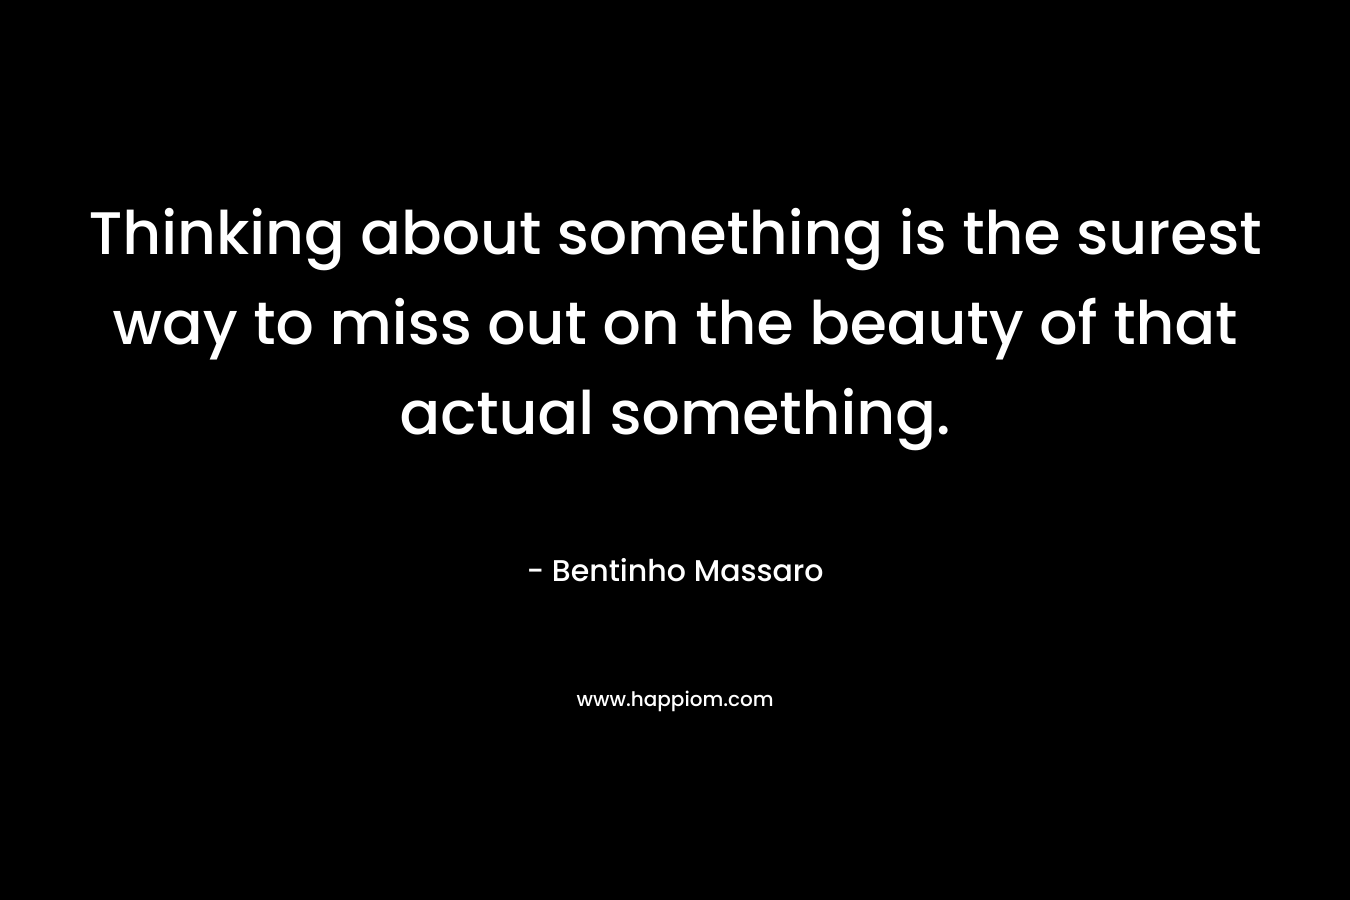 Thinking about something is the surest way to miss out on the beauty of that actual something.